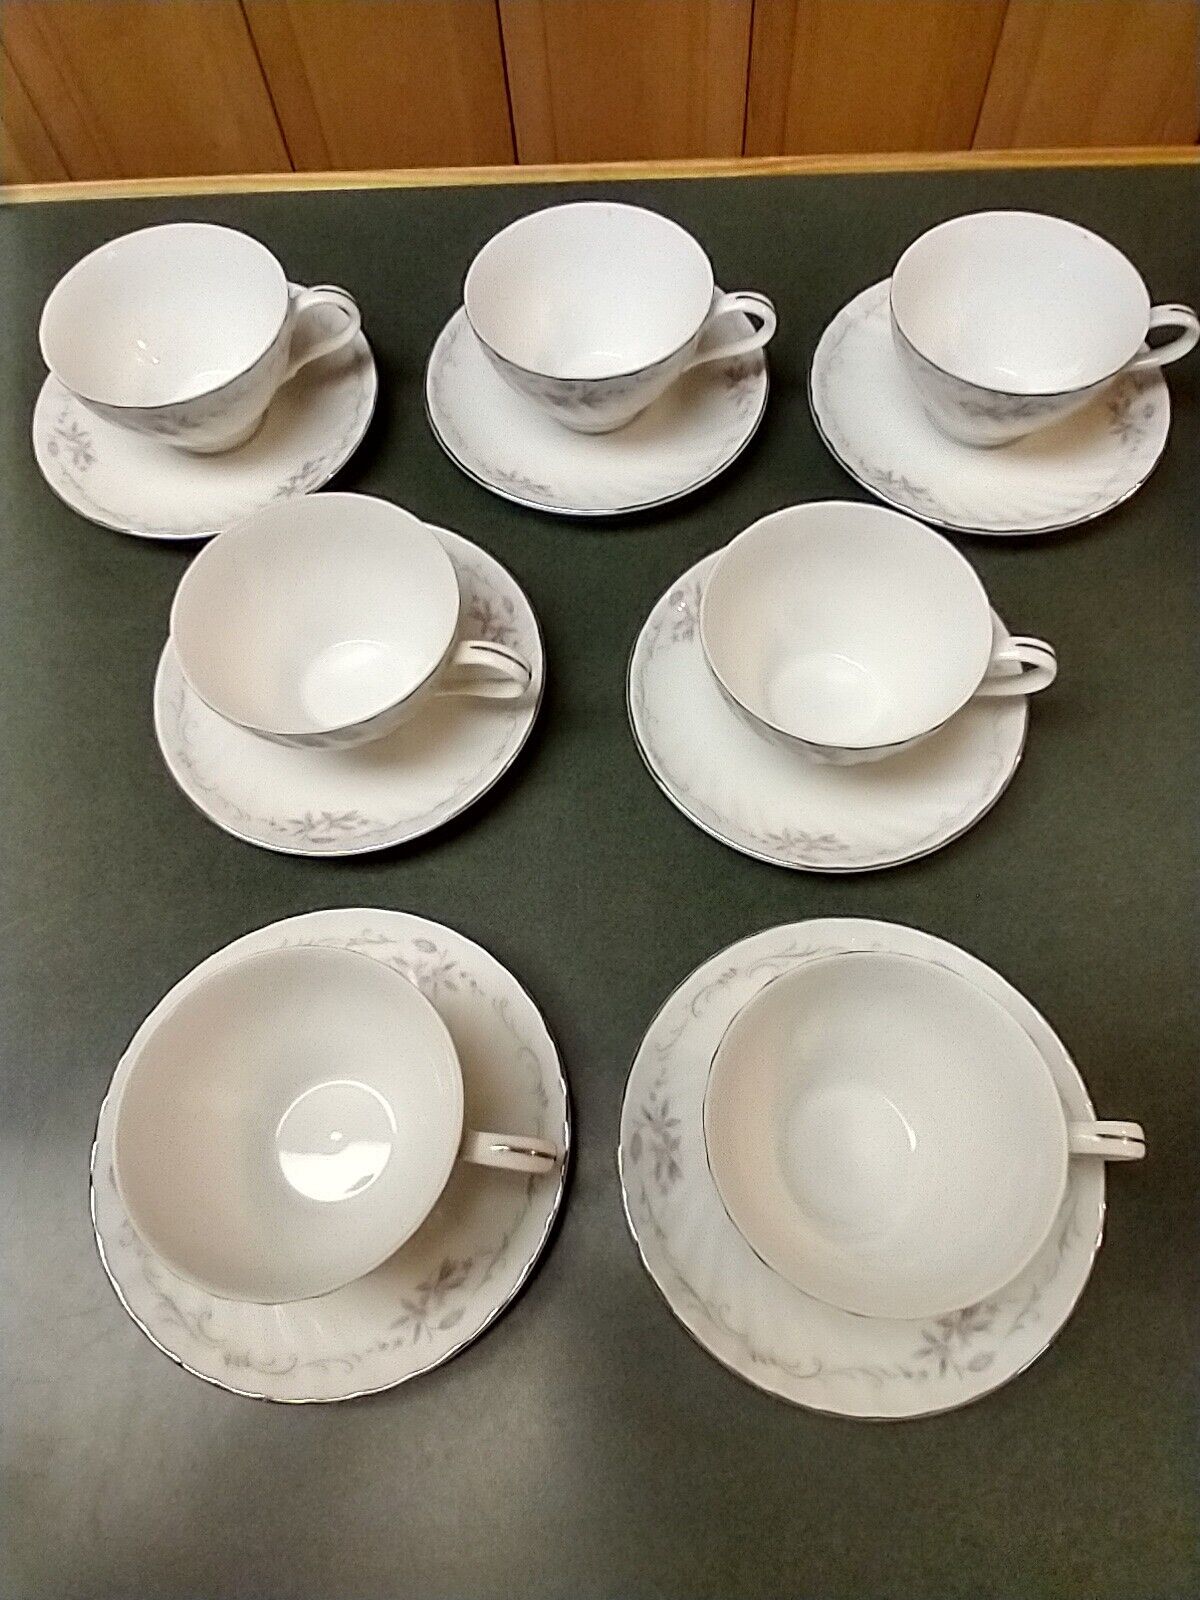 Set of 7 Genuine Porcelain China Gold Standard Side Coffee Tea Cups and Saucers